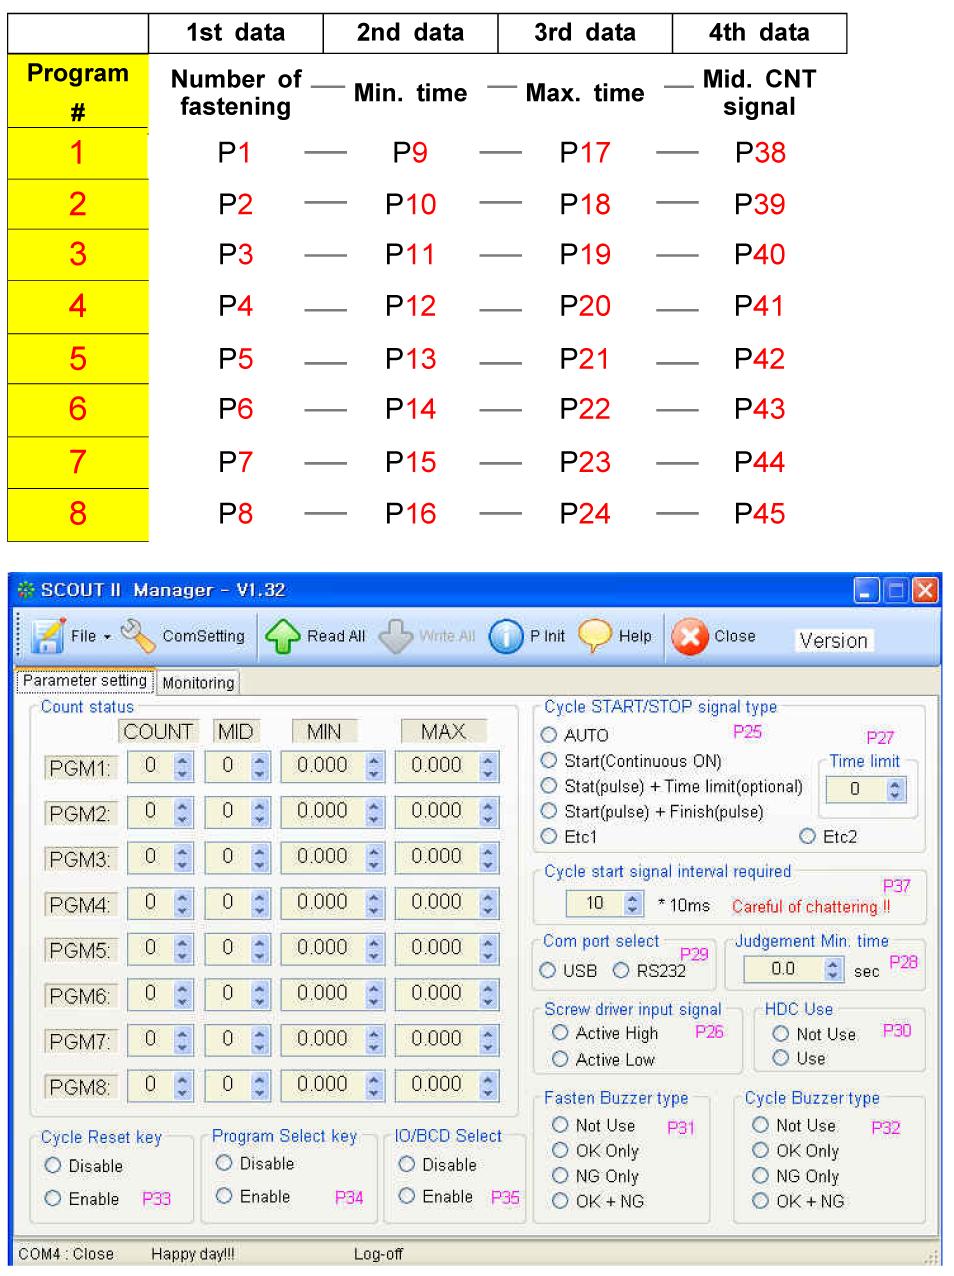 Program # and Parameters The program numbers from 1 to 8 are effected together with parameter 1~8